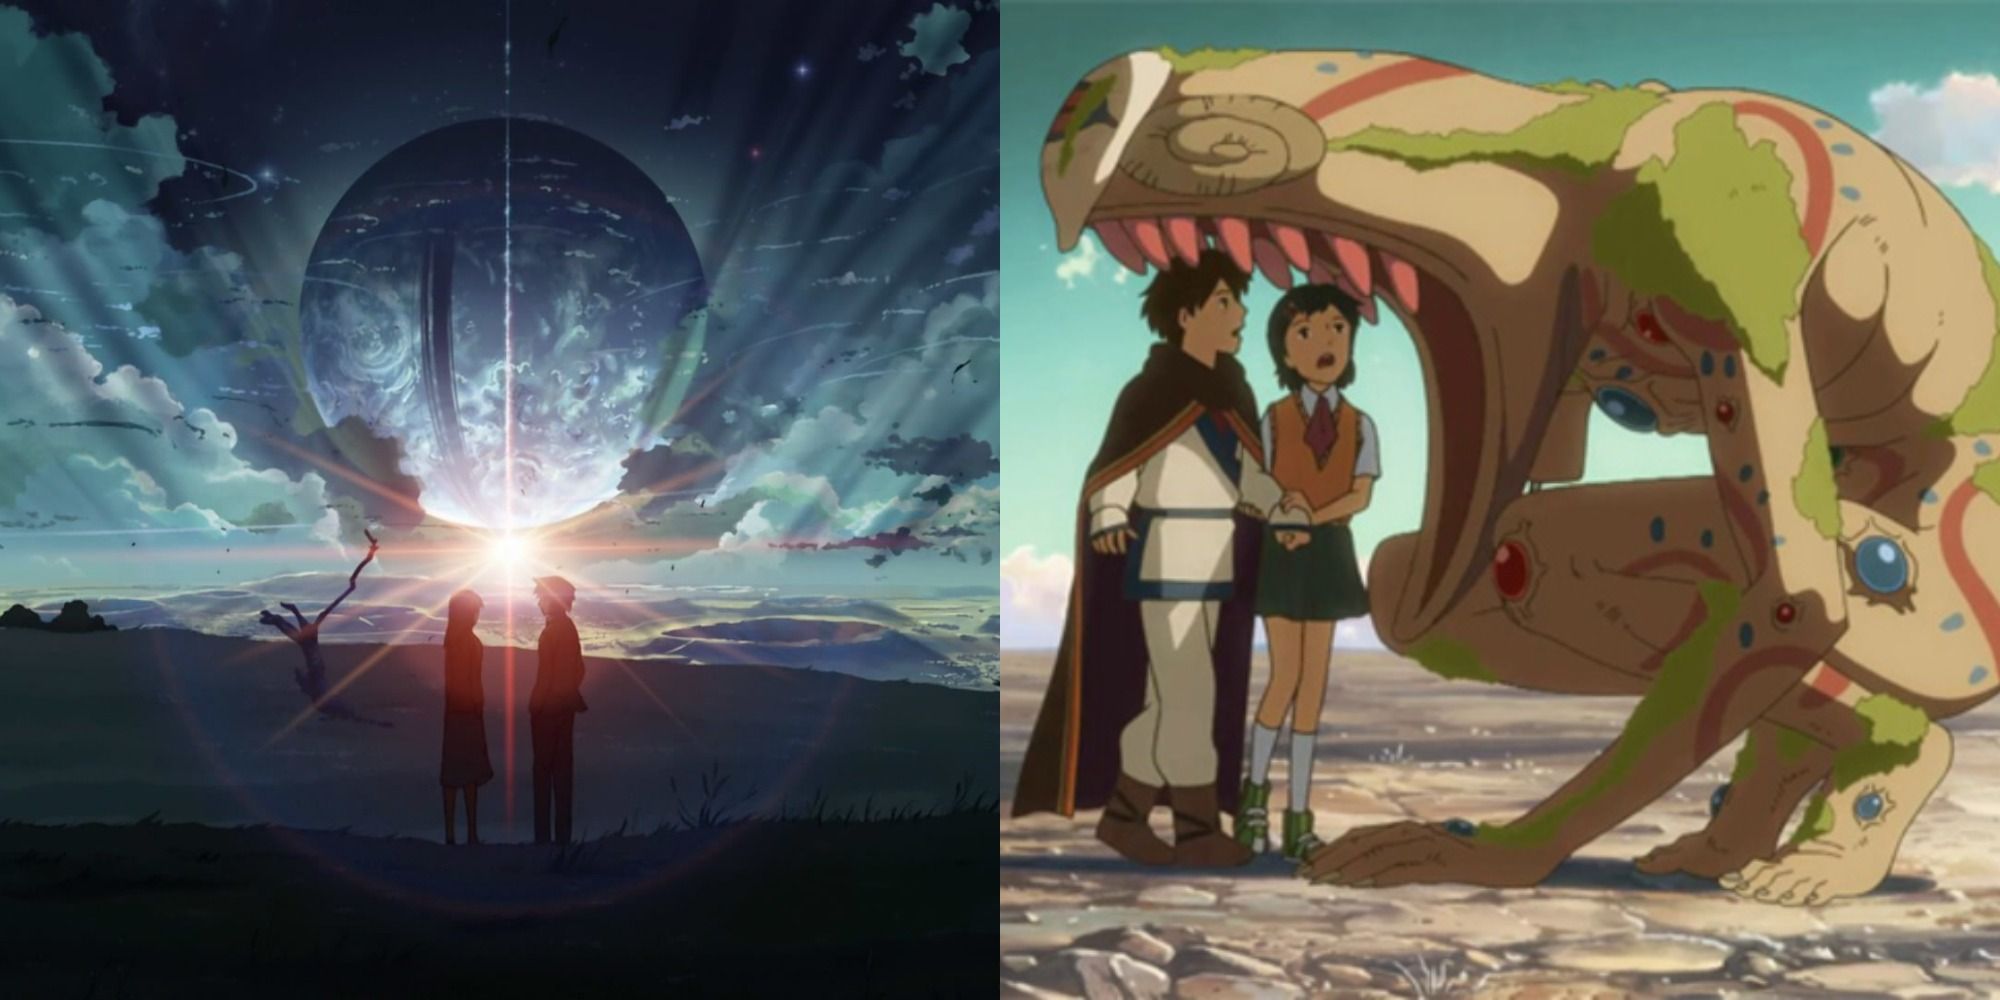 Split image showing scenes from 5 Centimeters Per Second and Children Who Chase Lost Voices From Deep Below.